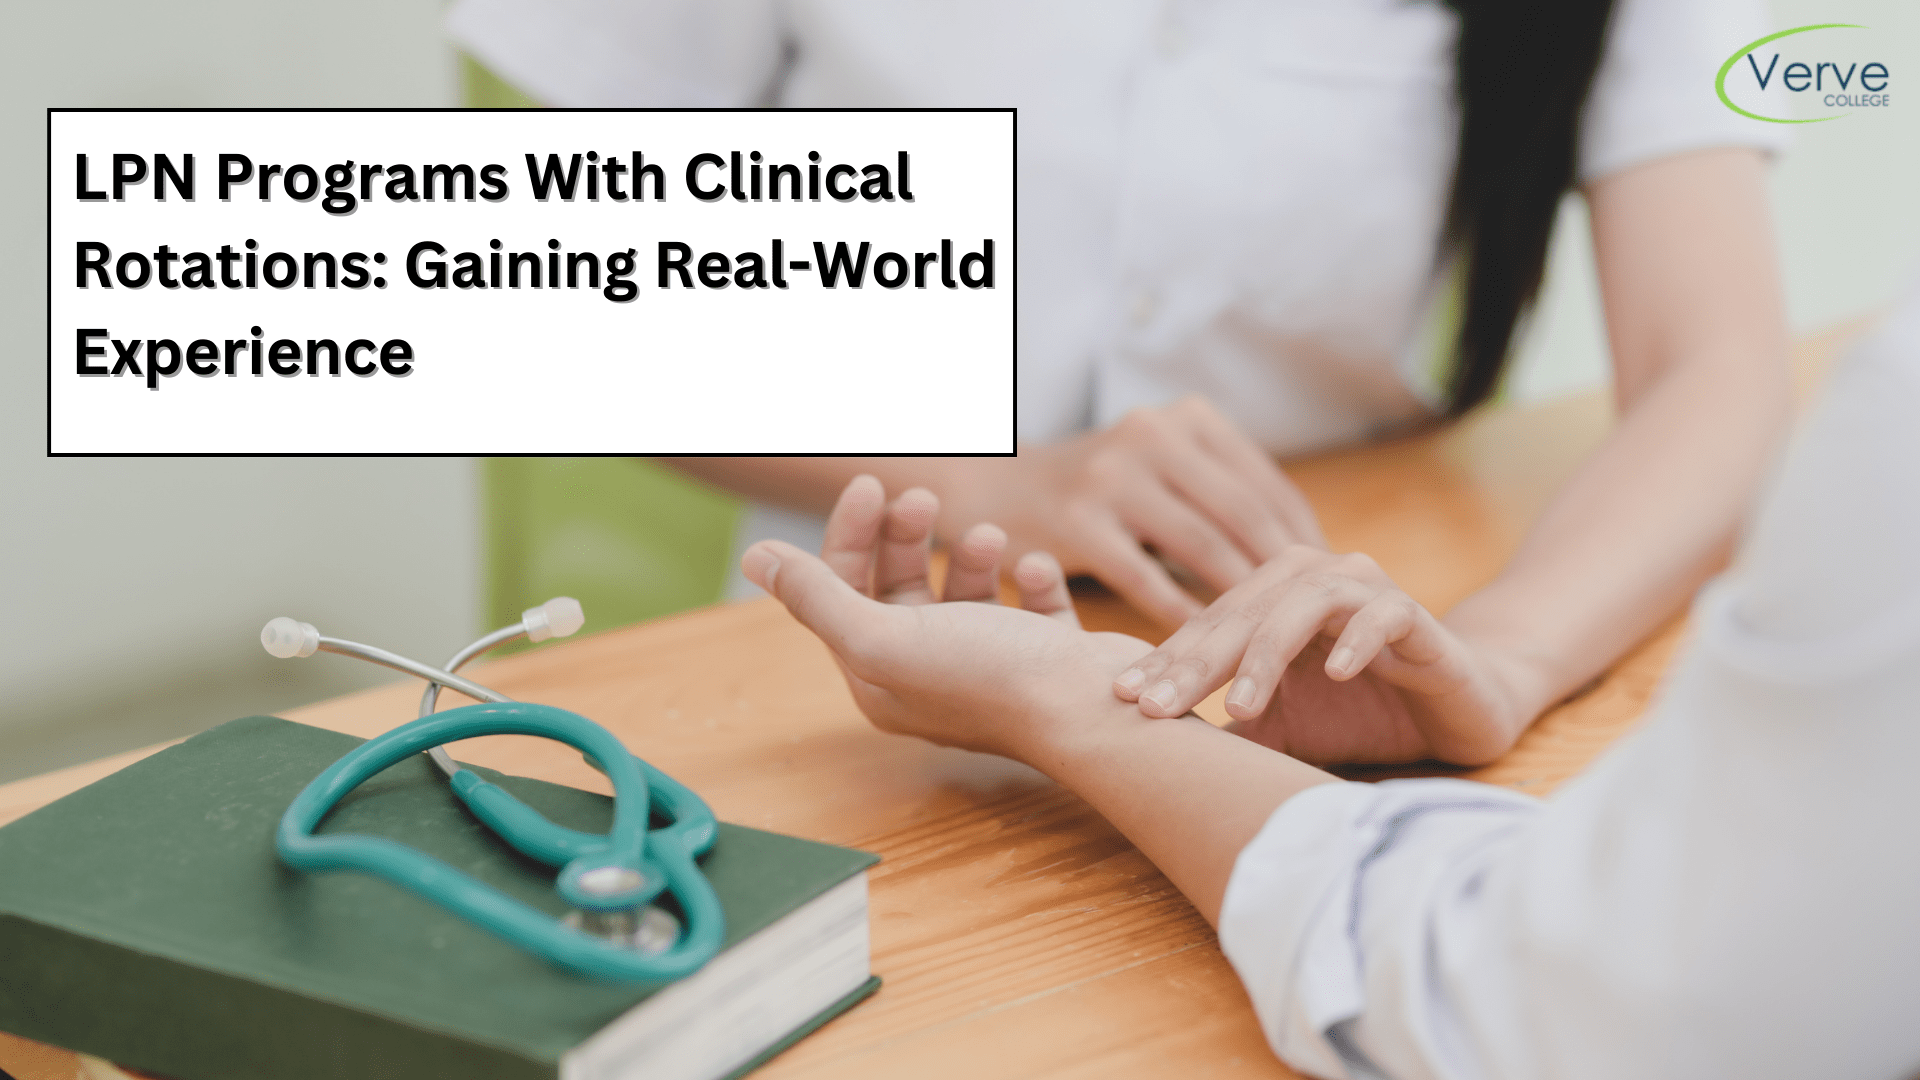 LPN Programs With Clinical Rotations: Gaining Real-World Experience